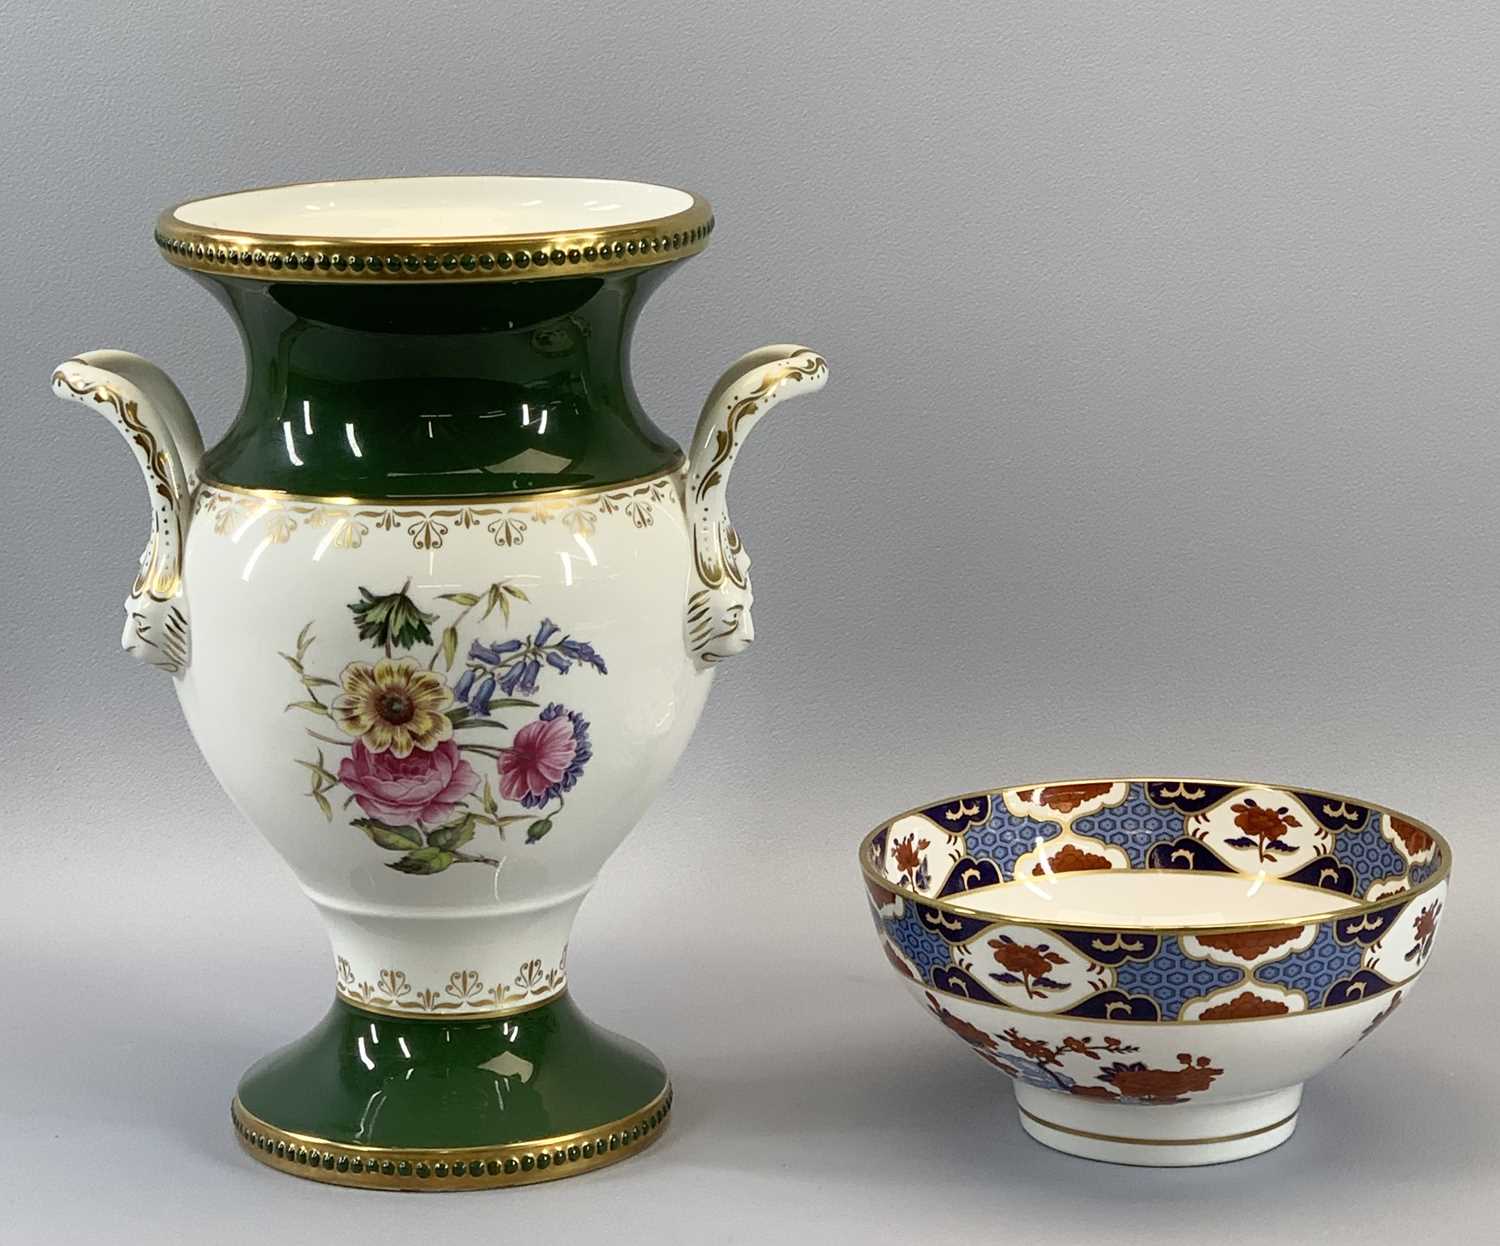 SPODE - a fine twin-handled pedestal vase, gilt and floral decorated, 28.5cms tall and a Spode